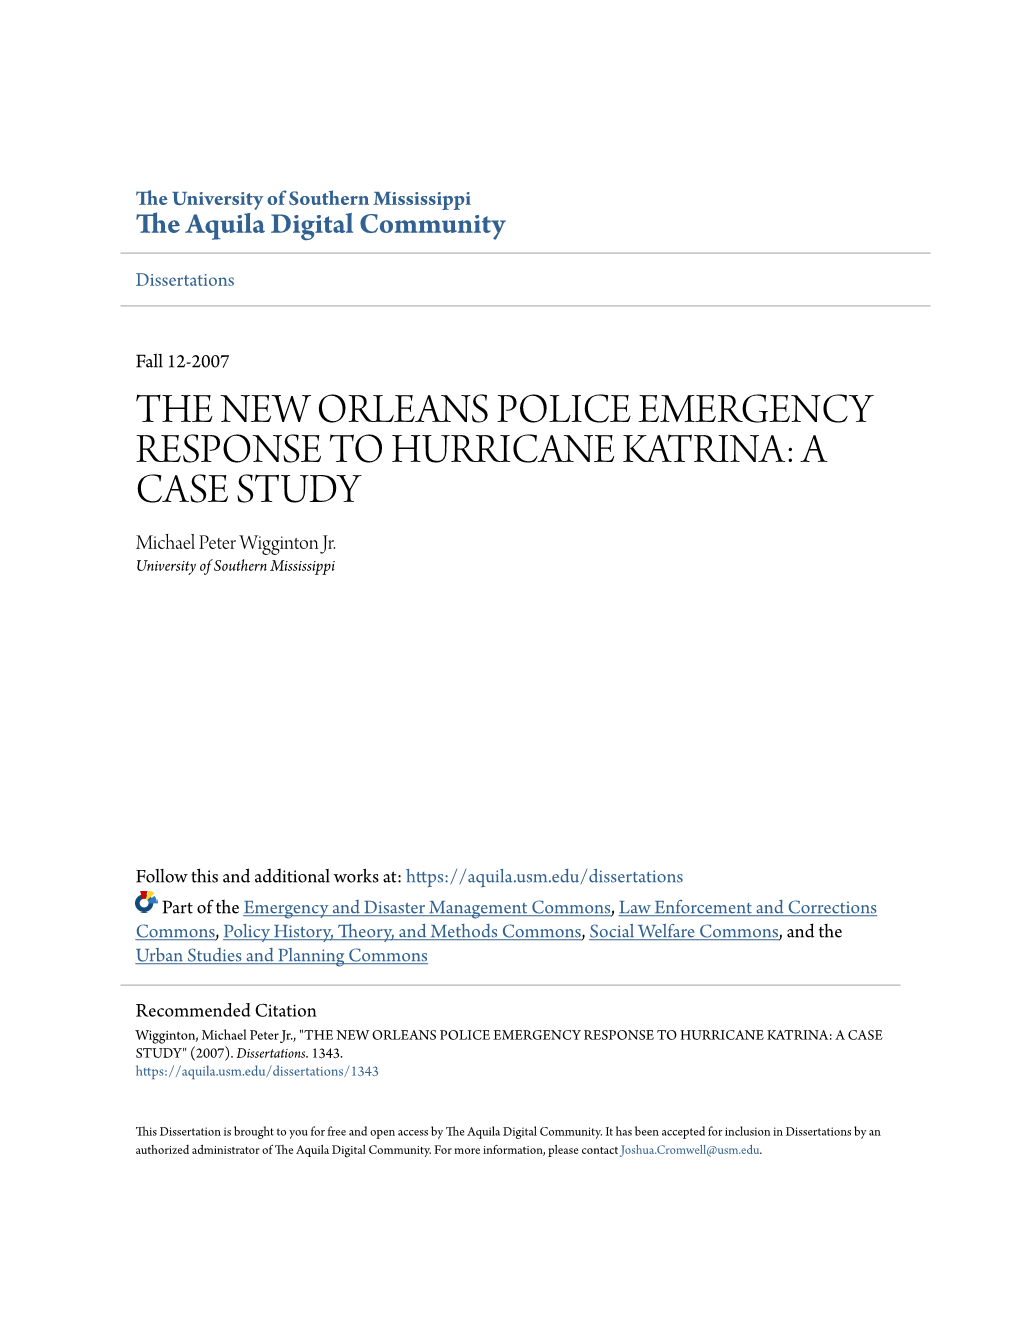 THE NEW ORLEANS POLICE EMERGENCY RESPONSE to HURRICANE KATRINA: a CASE STUDY Michael Peter Wigginton Jr